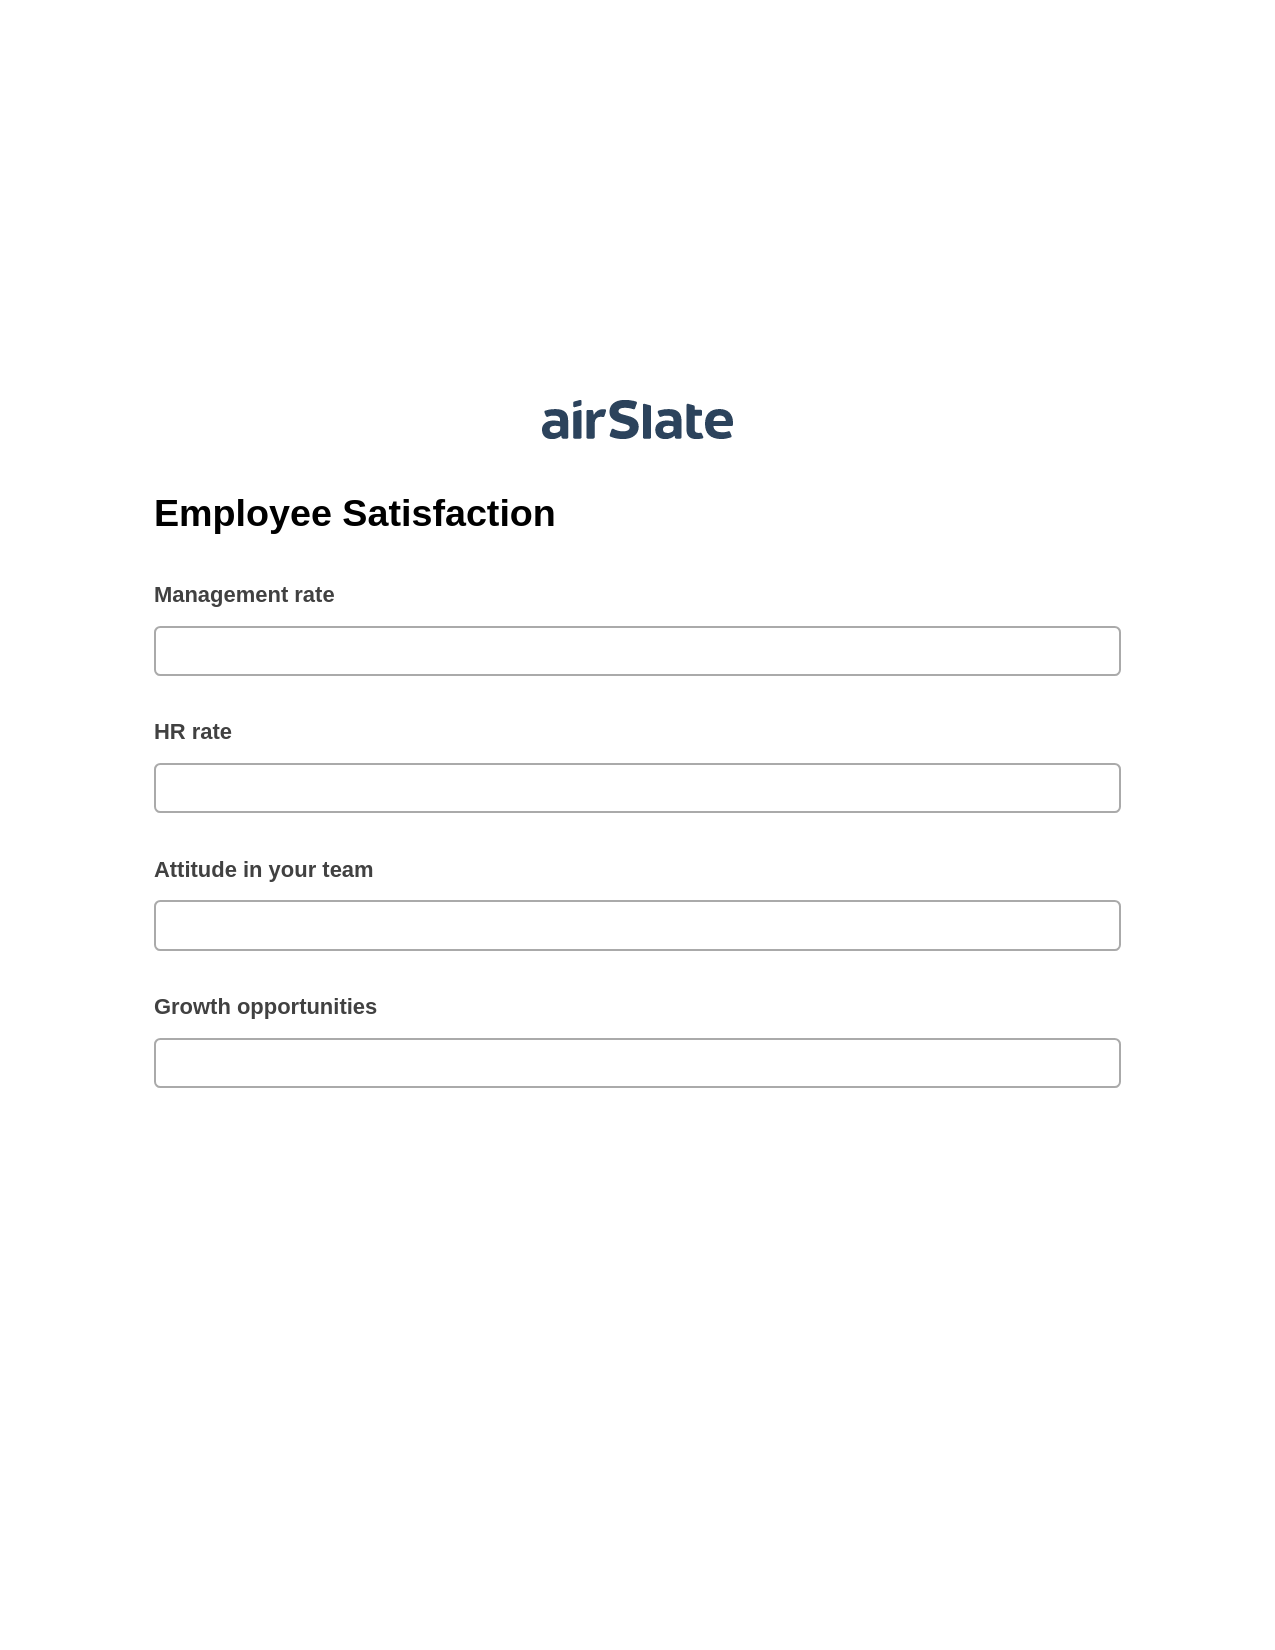 Employee Satisfaction Pre-fill from CSV File Bot, Unassign Role Bot, Export to NetSuite Record Bot